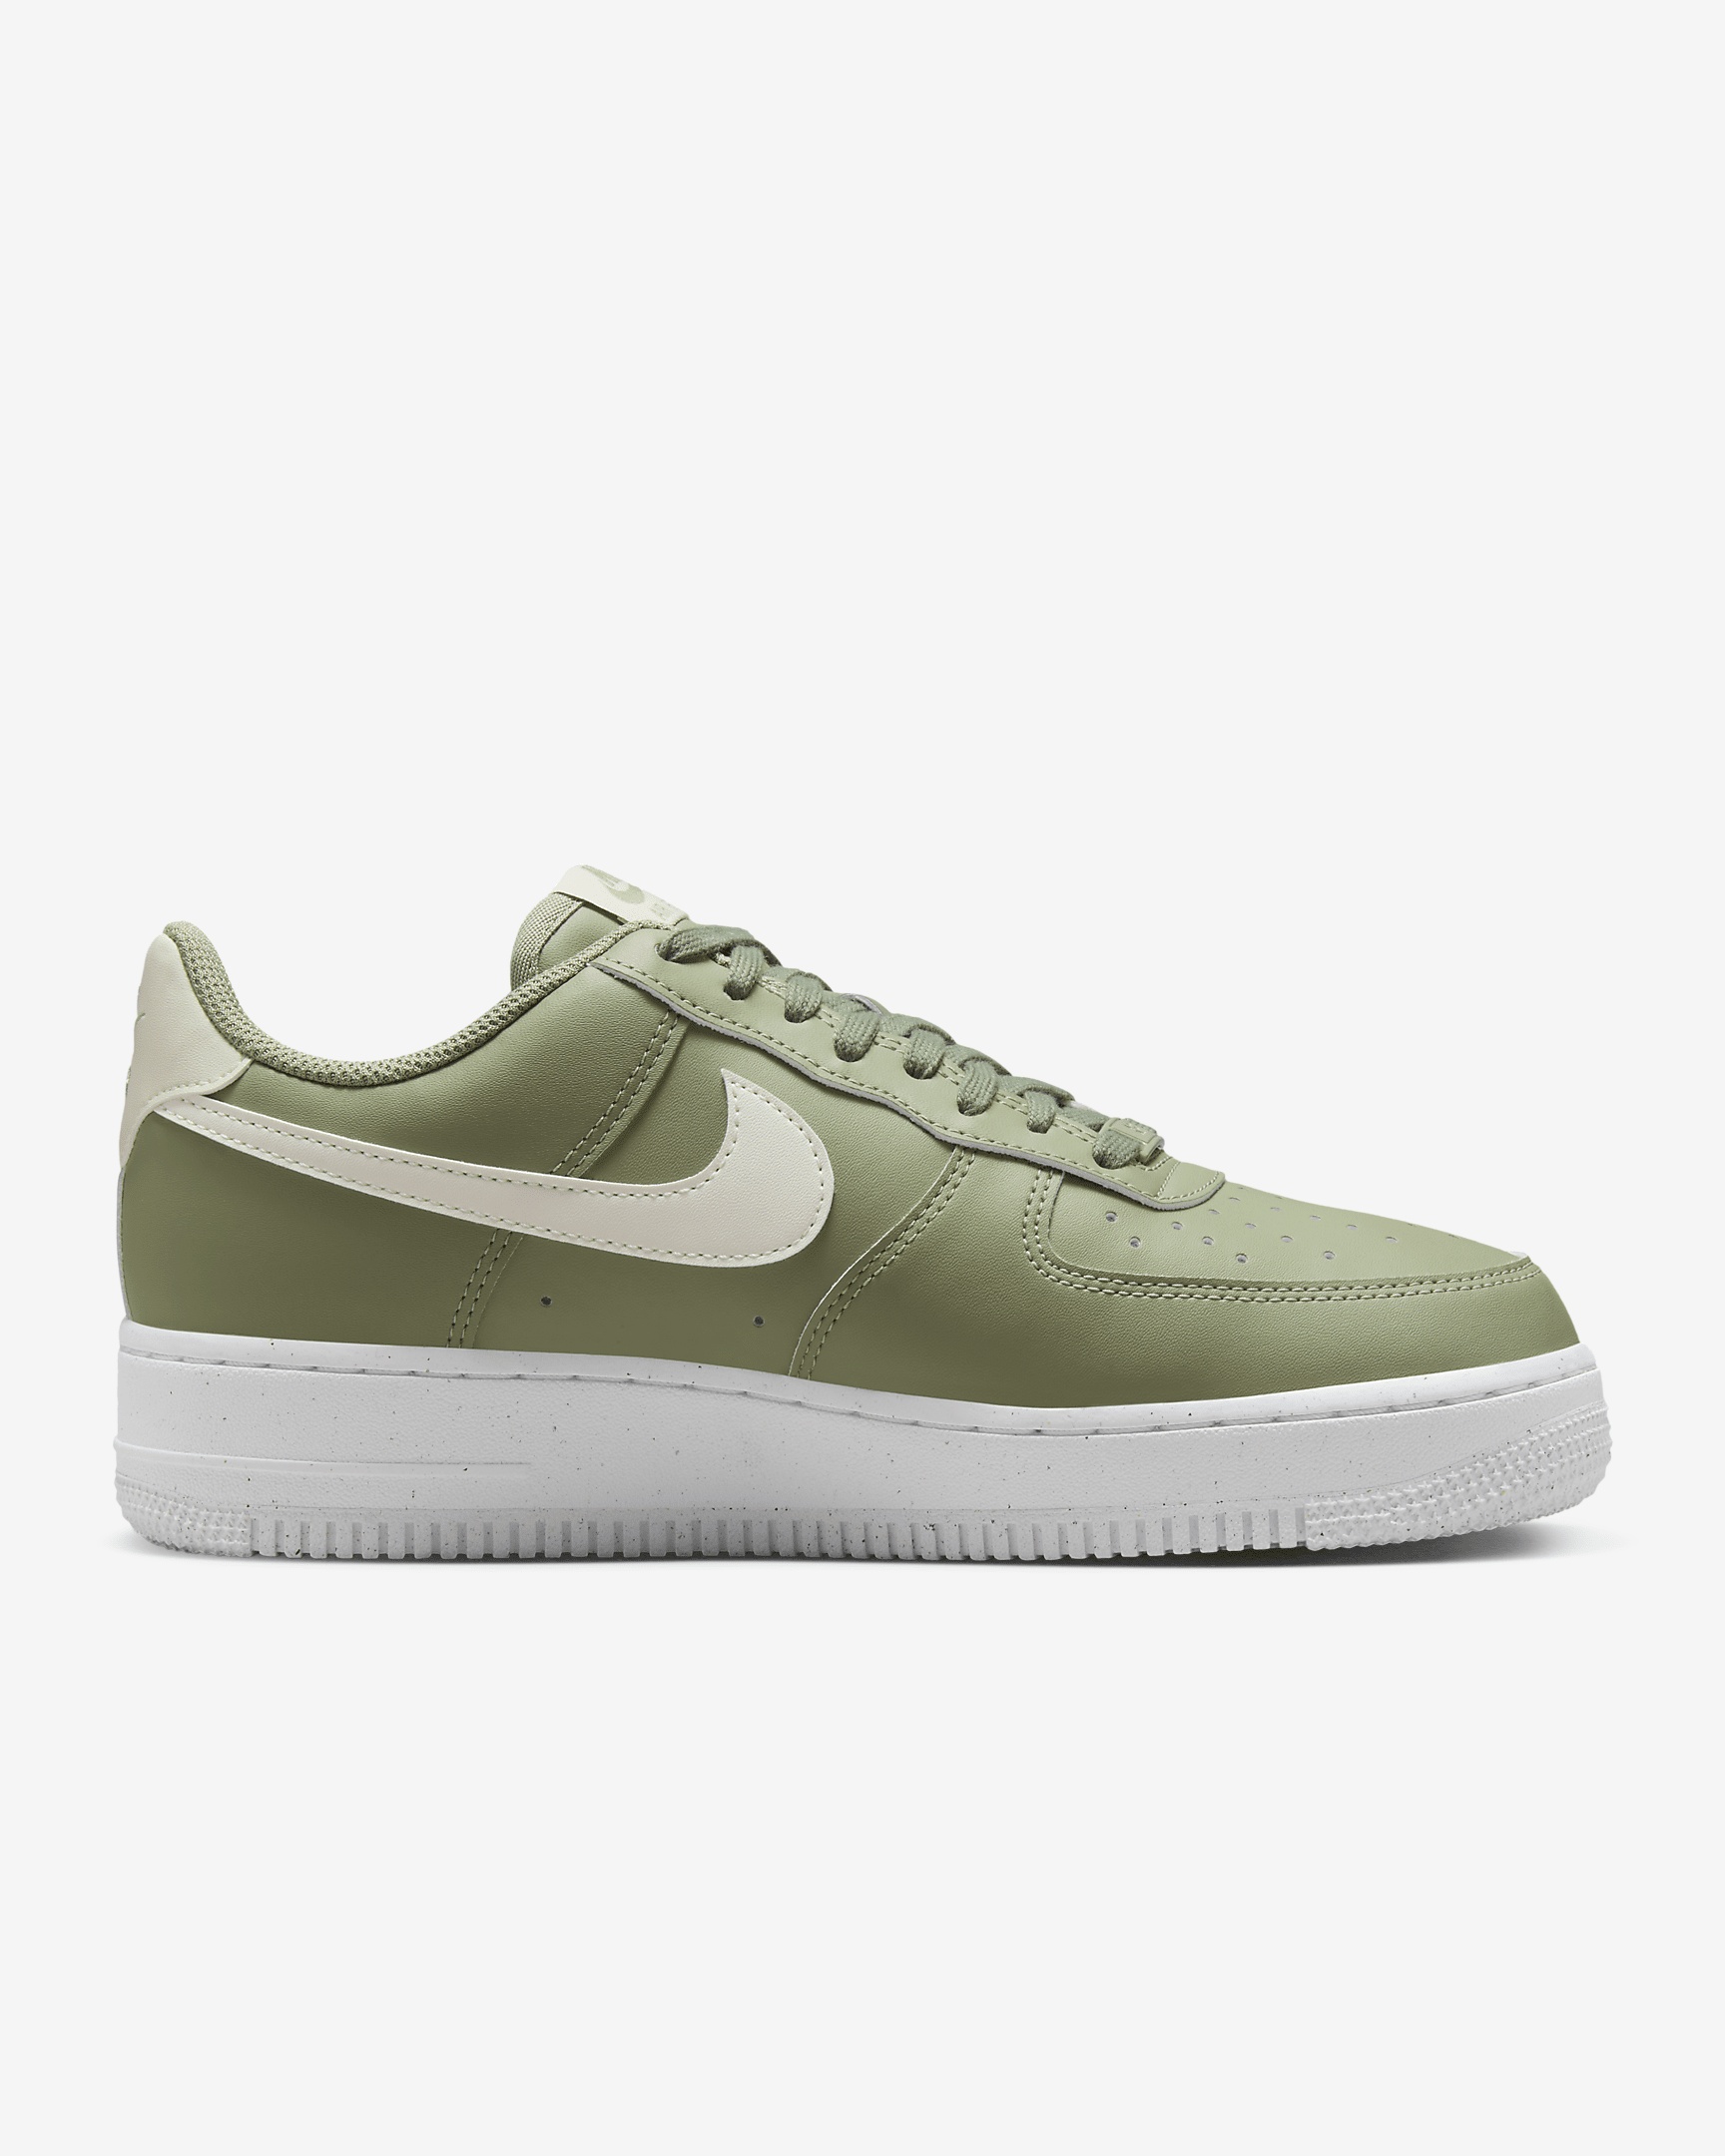 Nike Women's Air Force 1 '07 Shoes - 4